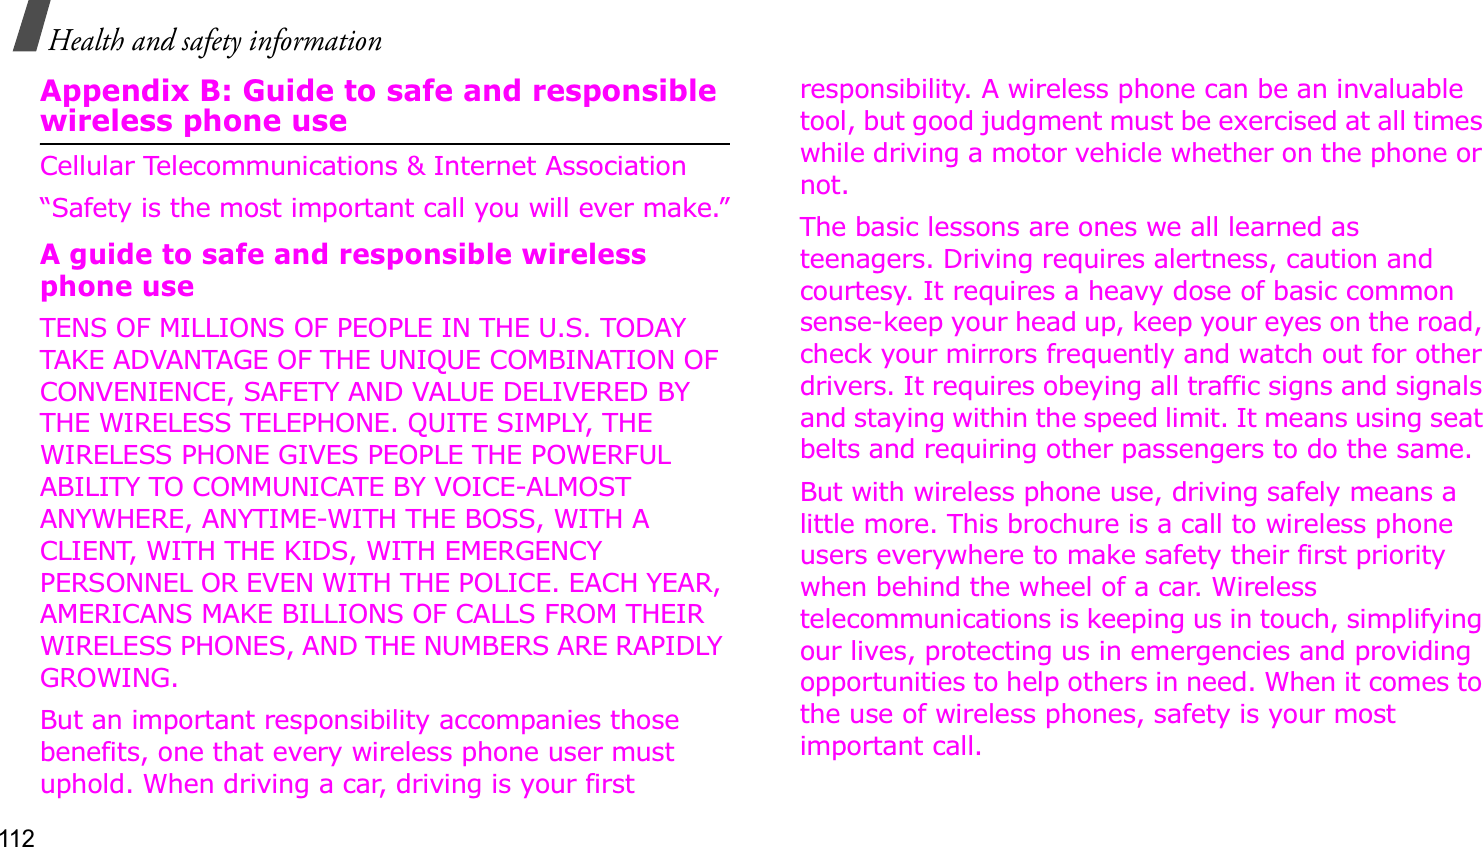 112Health and safety informationAppendix B: Guide to safe and responsible wireless phone useCellular Telecommunications &amp; Internet Association“Safety is the most important call you will ever make.”A guide to safe and responsible wireless phone useTENS OF MILLIONS OF PEOPLE IN THE U.S. TODAY TAKE ADVANTAGE OF THE UNIQUE COMBINATION OF CONVENIENCE, SAFETY AND VALUE DELIVERED BY THE WIRELESS TELEPHONE. QUITE SIMPLY, THE WIRELESS PHONE GIVES PEOPLE THE POWERFUL ABILITY TO COMMUNICATE BY VOICE-ALMOST ANYWHERE, ANYTIME-WITH THE BOSS, WITH A CLIENT, WITH THE KIDS, WITH EMERGENCY PERSONNEL OR EVEN WITH THE POLICE. EACH YEAR, AMERICANS MAKE BILLIONS OF CALLS FROM THEIR WIRELESS PHONES, AND THE NUMBERS ARE RAPIDLY GROWING.But an important responsibility accompanies those benefits, one that every wireless phone user must uphold. When driving a car, driving is your first responsibility. A wireless phone can be an invaluable tool, but good judgment must be exercised at all times while driving a motor vehicle whether on the phone or not.The basic lessons are ones we all learned as teenagers. Driving requires alertness, caution and courtesy. It requires a heavy dose of basic common sense-keep your head up, keep your eyes on the road, check your mirrors frequently and watch out for other drivers. It requires obeying all traffic signs and signals and staying within the speed limit. It means using seat belts and requiring other passengers to do the same. But with wireless phone use, driving safely means a little more. This brochure is a call to wireless phone users everywhere to make safety their first priority when behind the wheel of a car. Wireless telecommunications is keeping us in touch, simplifying our lives, protecting us in emergencies and providing opportunities to help others in need. When it comes to the use of wireless phones, safety is your most important call.